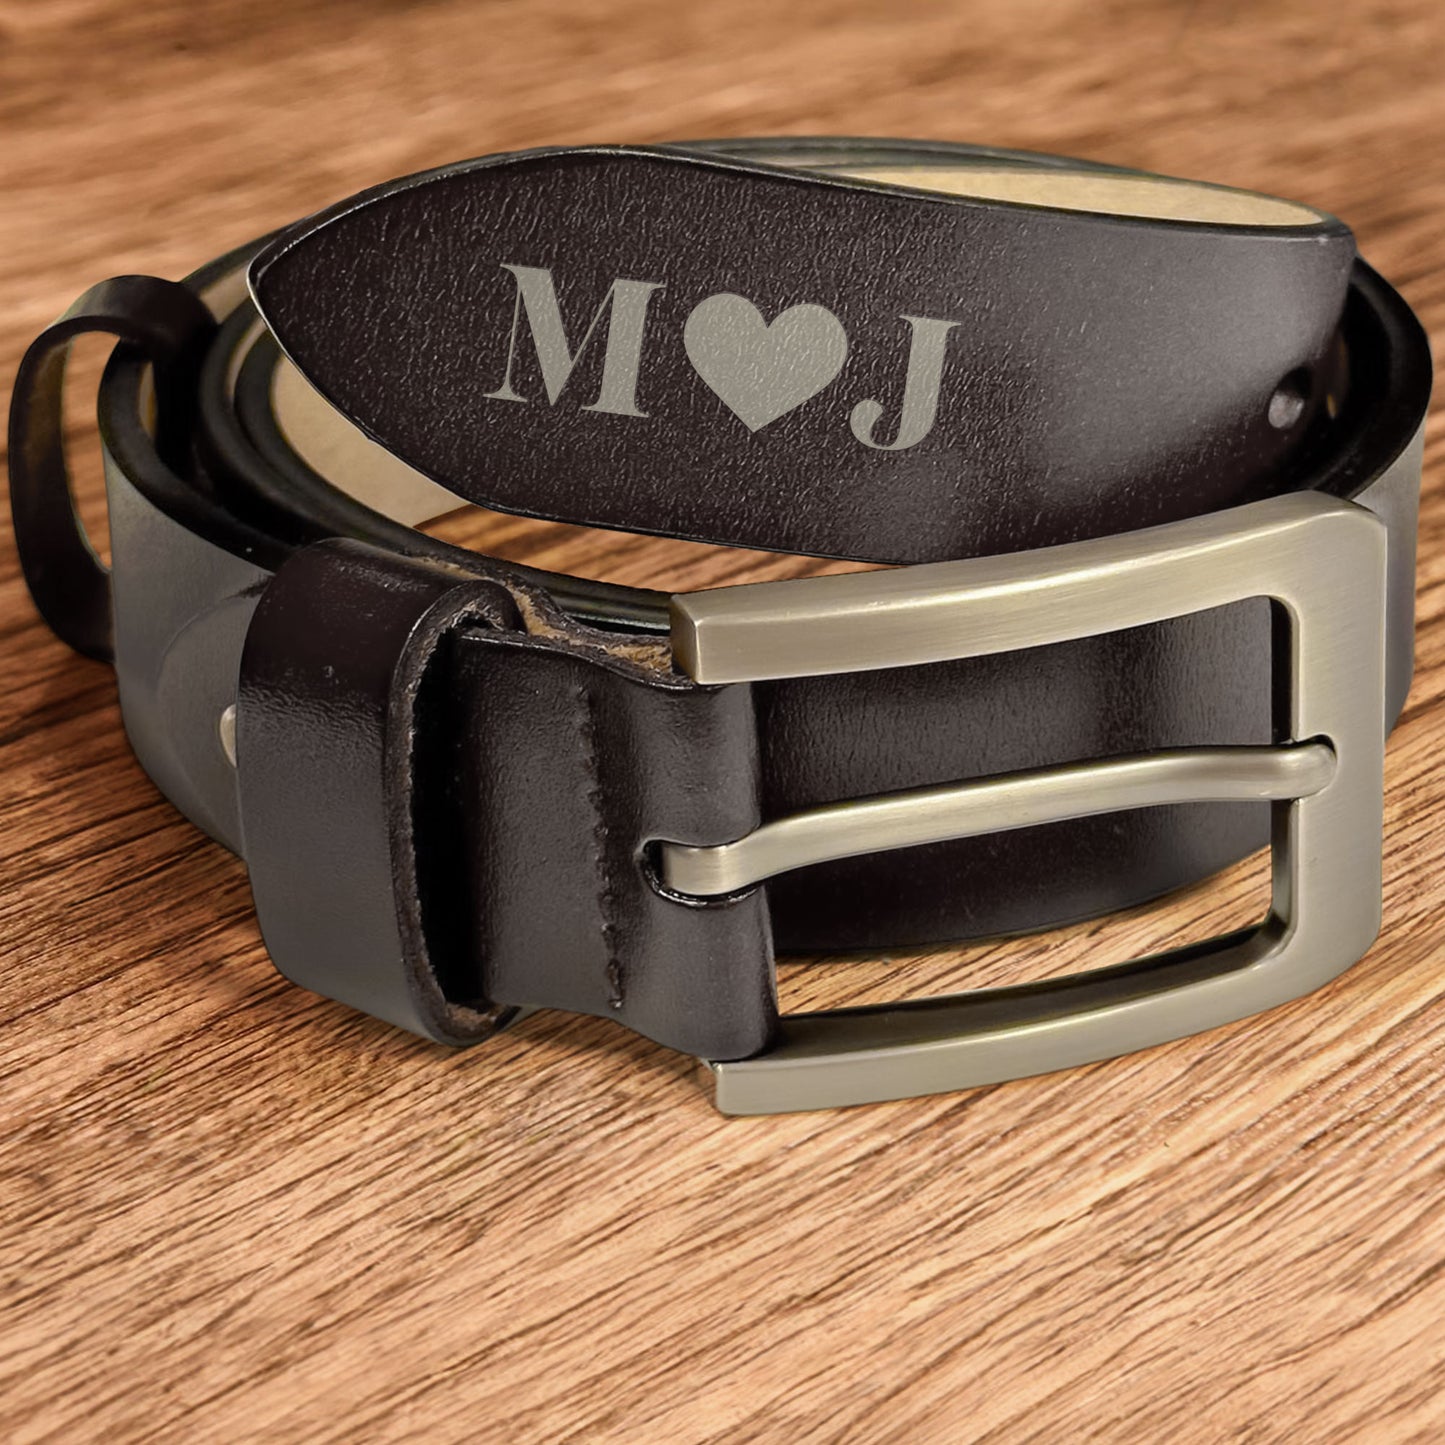 Anniversary Gift Secret Message For Him - Personalized Engraved Leather Belt